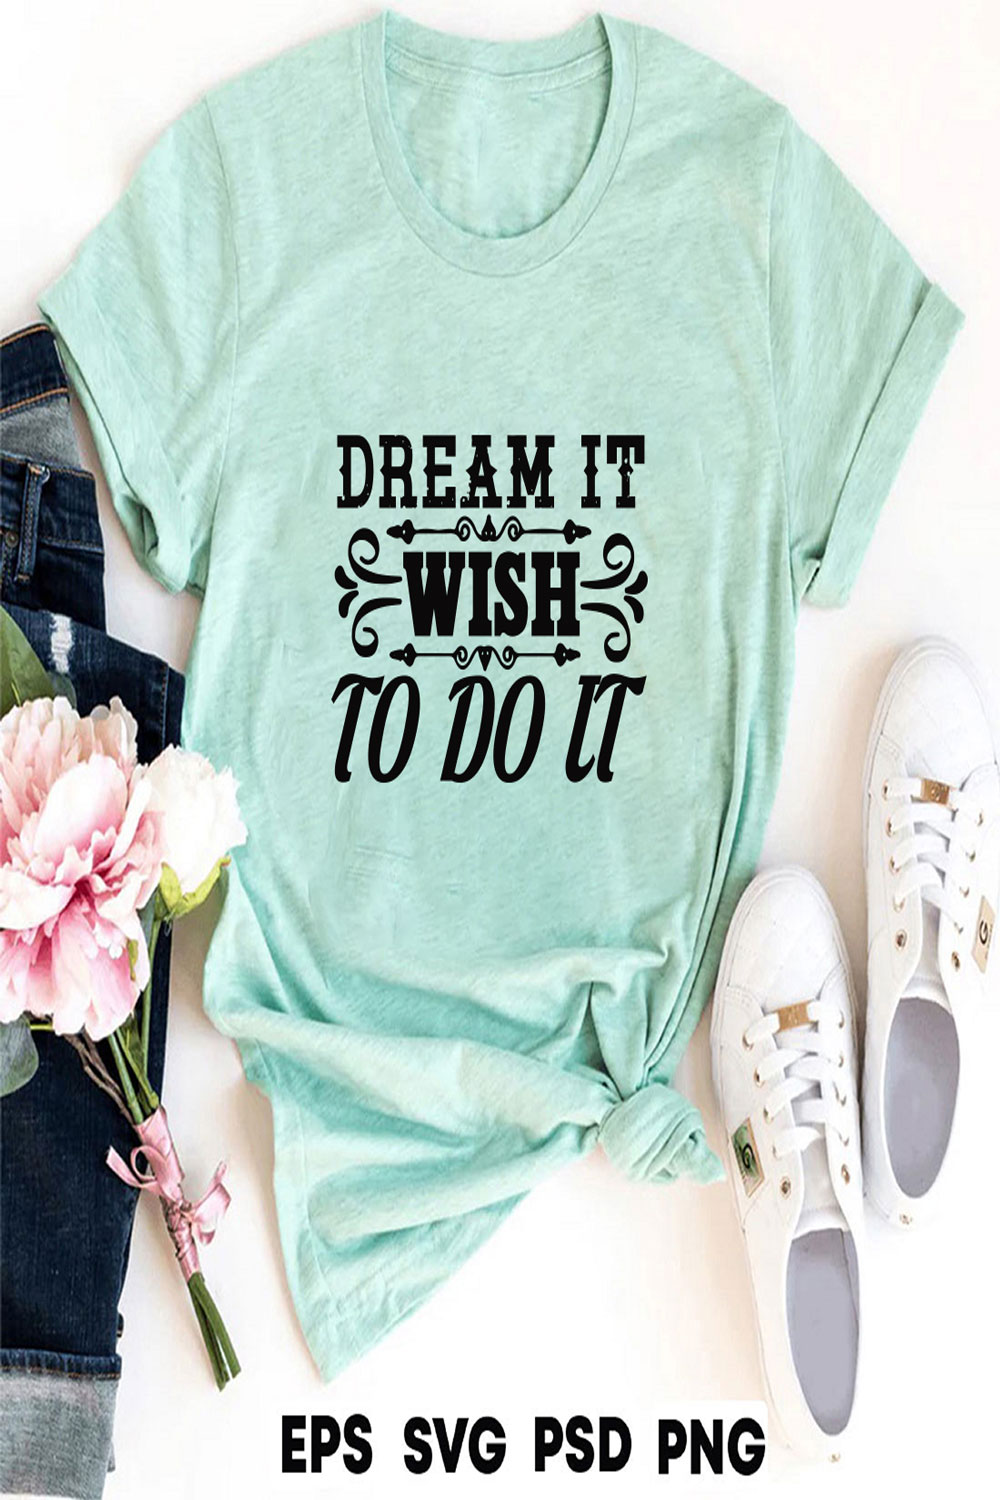 Dream it wish to do it pinterest preview image.